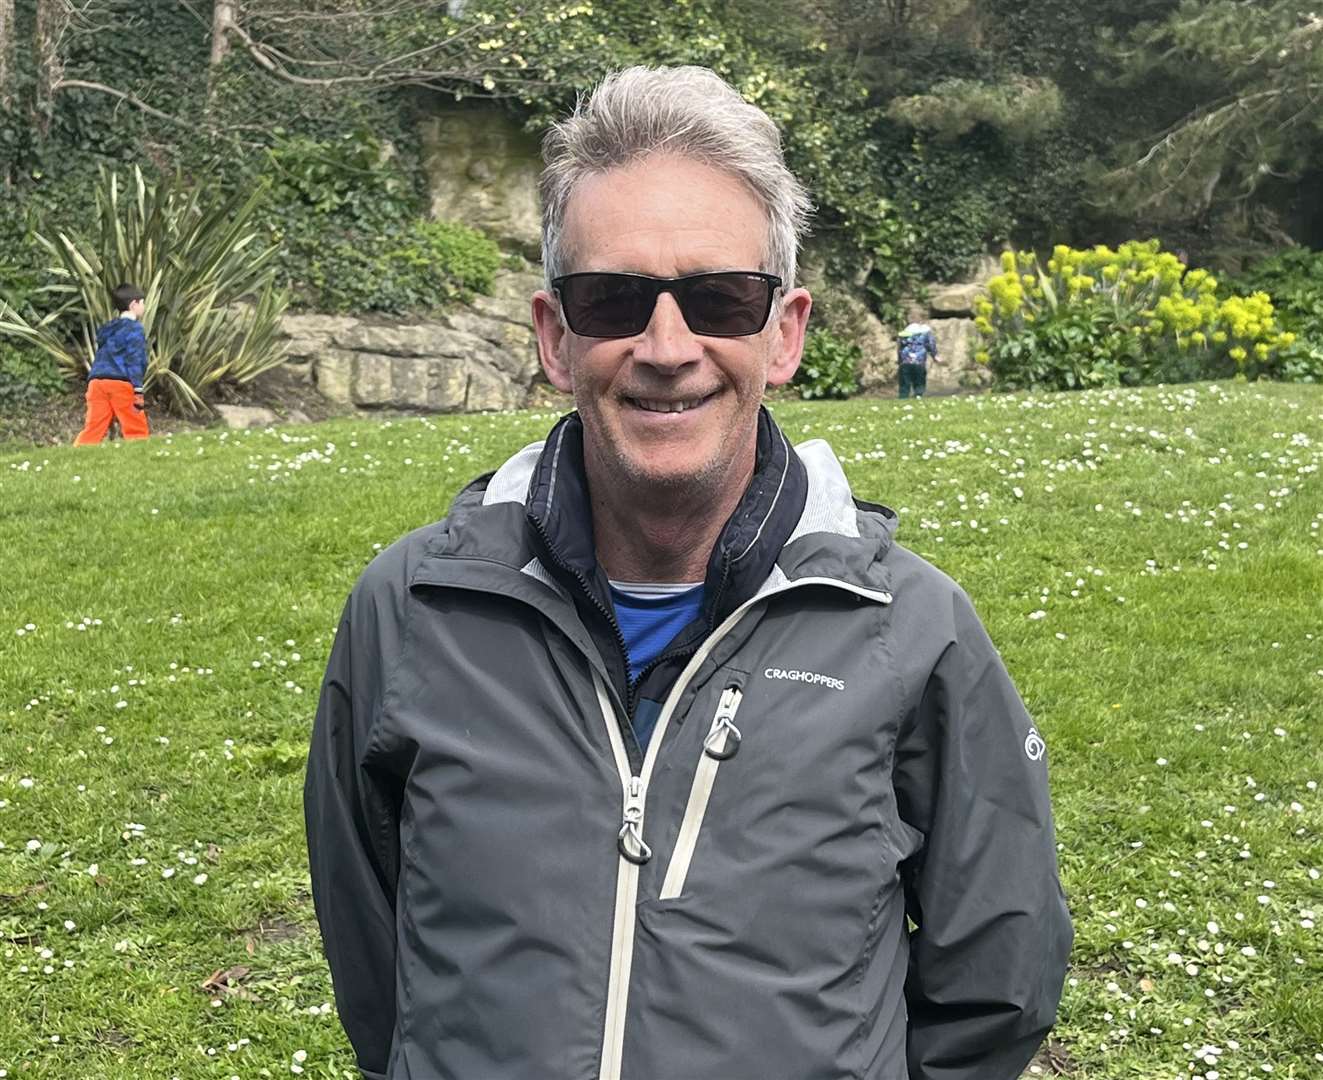 Mike Hayley is one of the founding members of the South Kent Harriers Running Club who regularly use the coastal paths along the Lower Leas